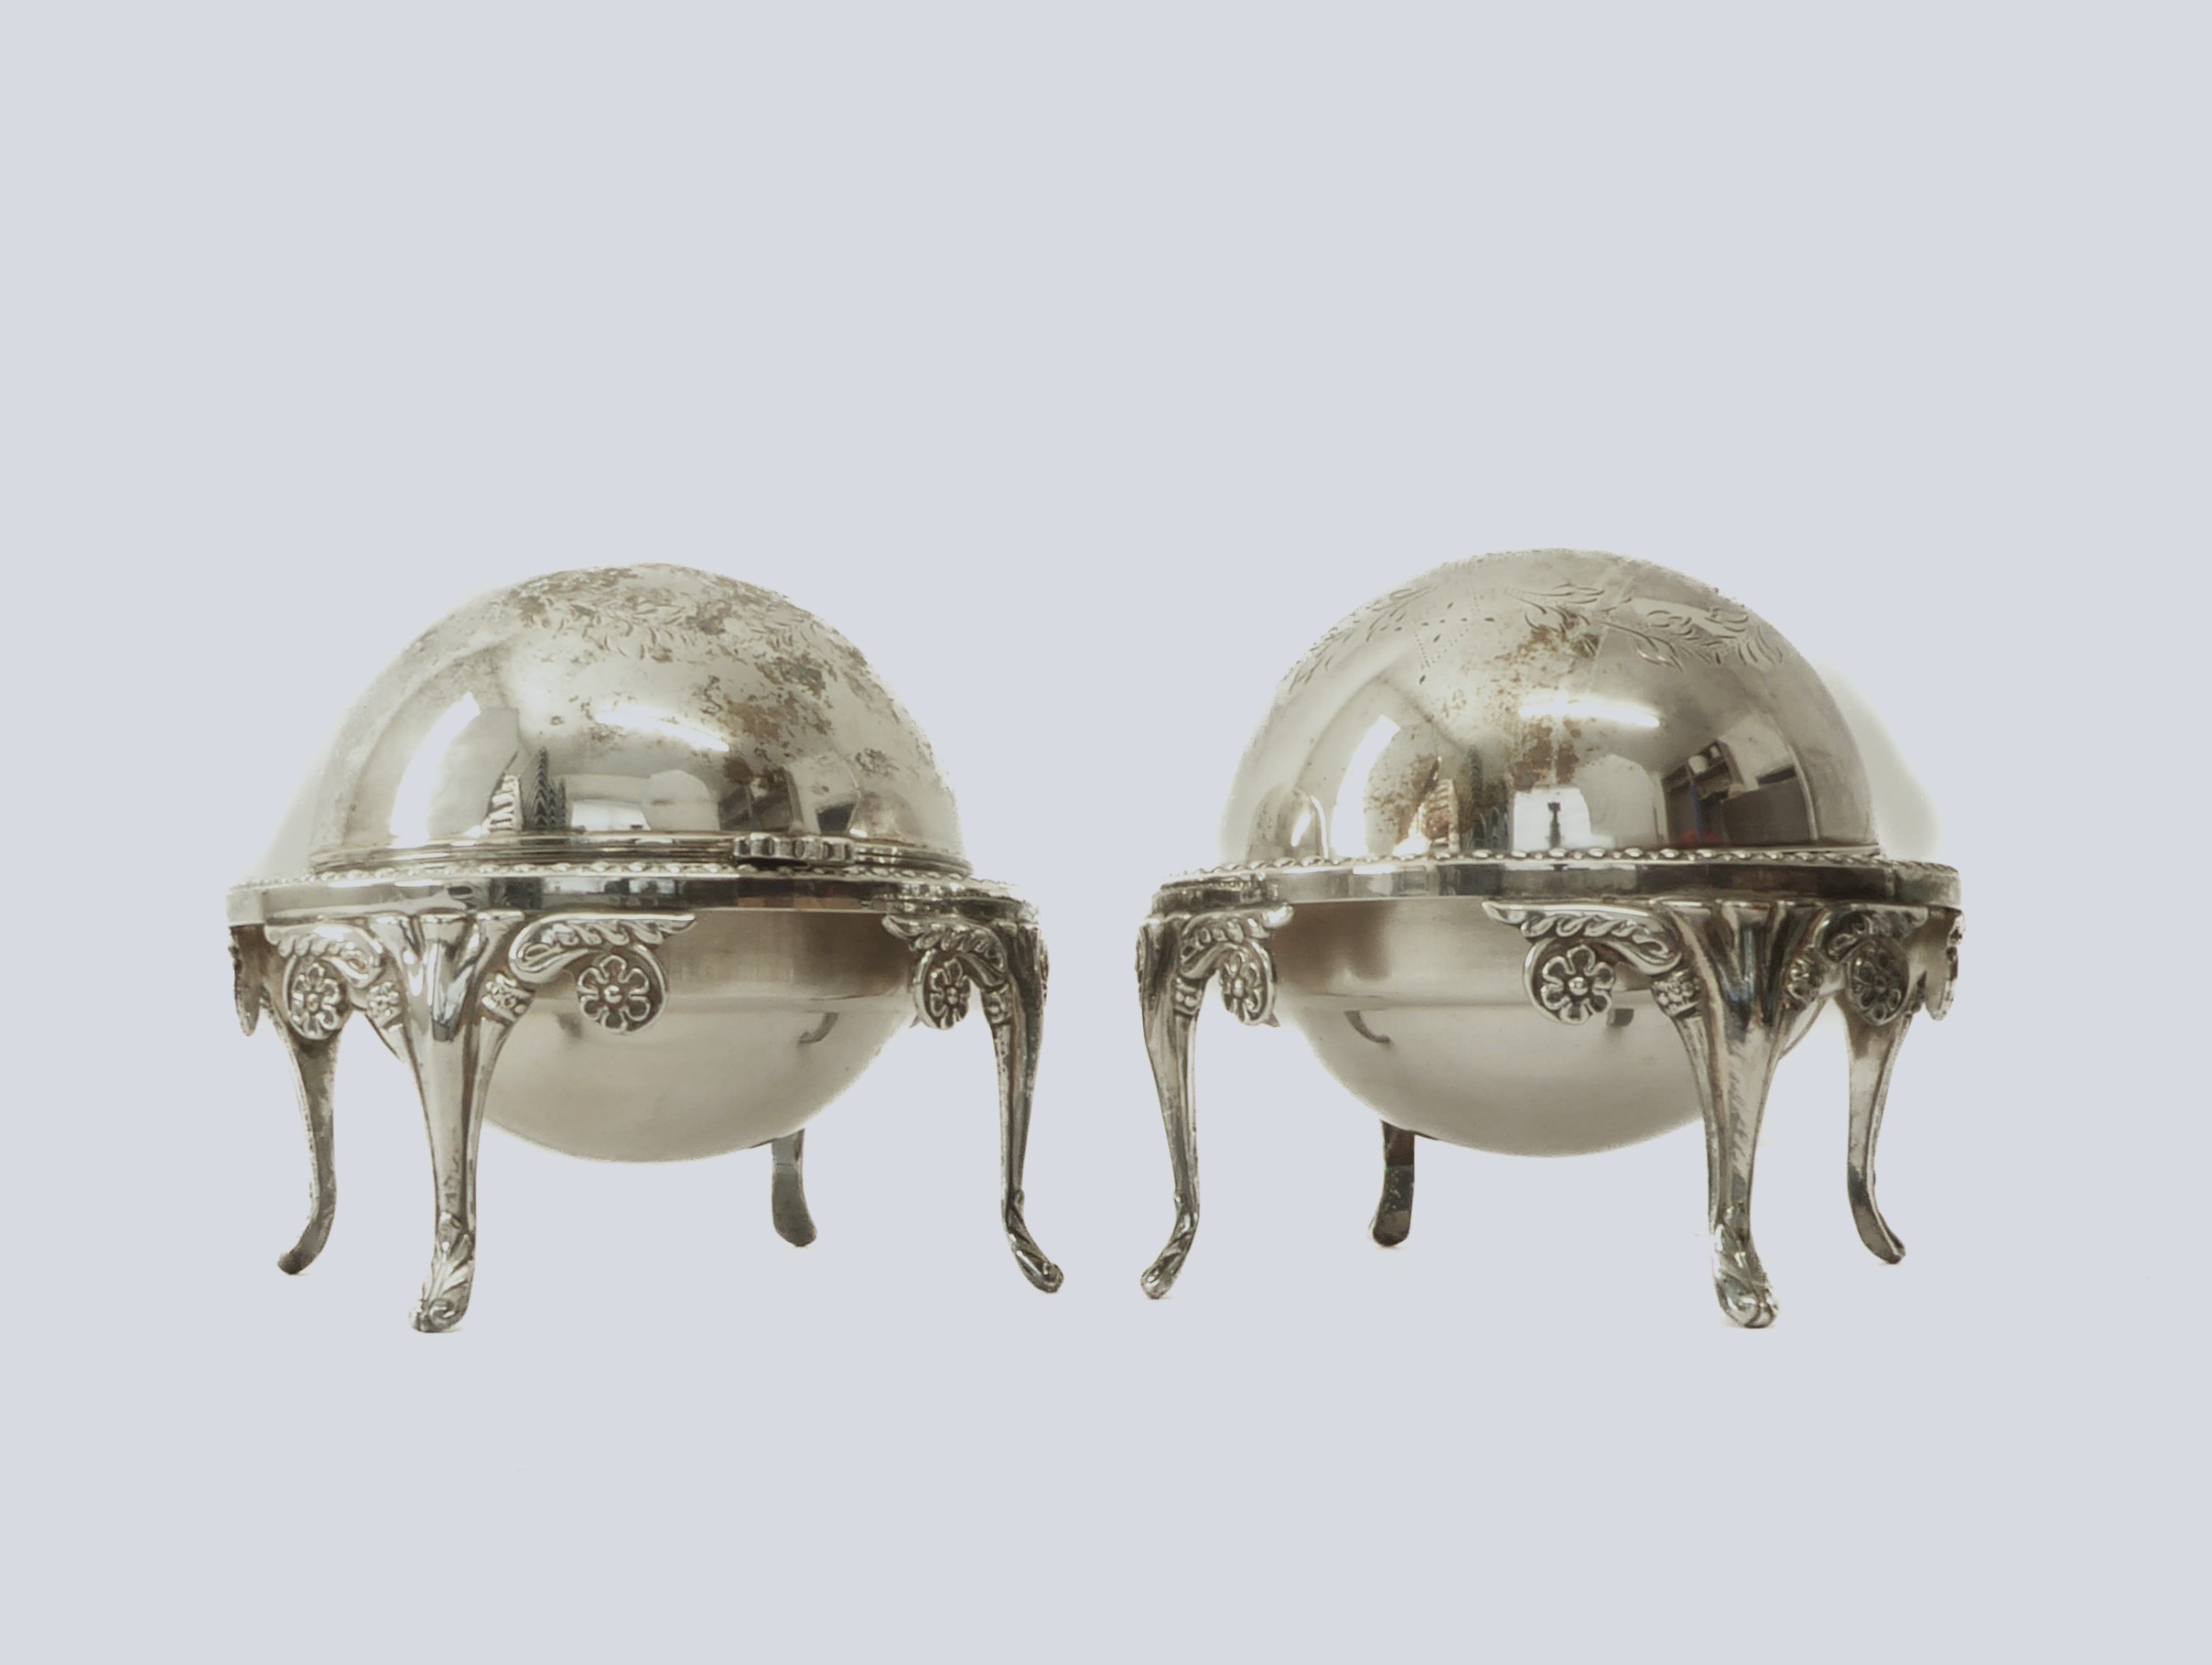 A pair of silver-plated butter dishes - 1930s-40s, with hinged domed covers chased with foliate